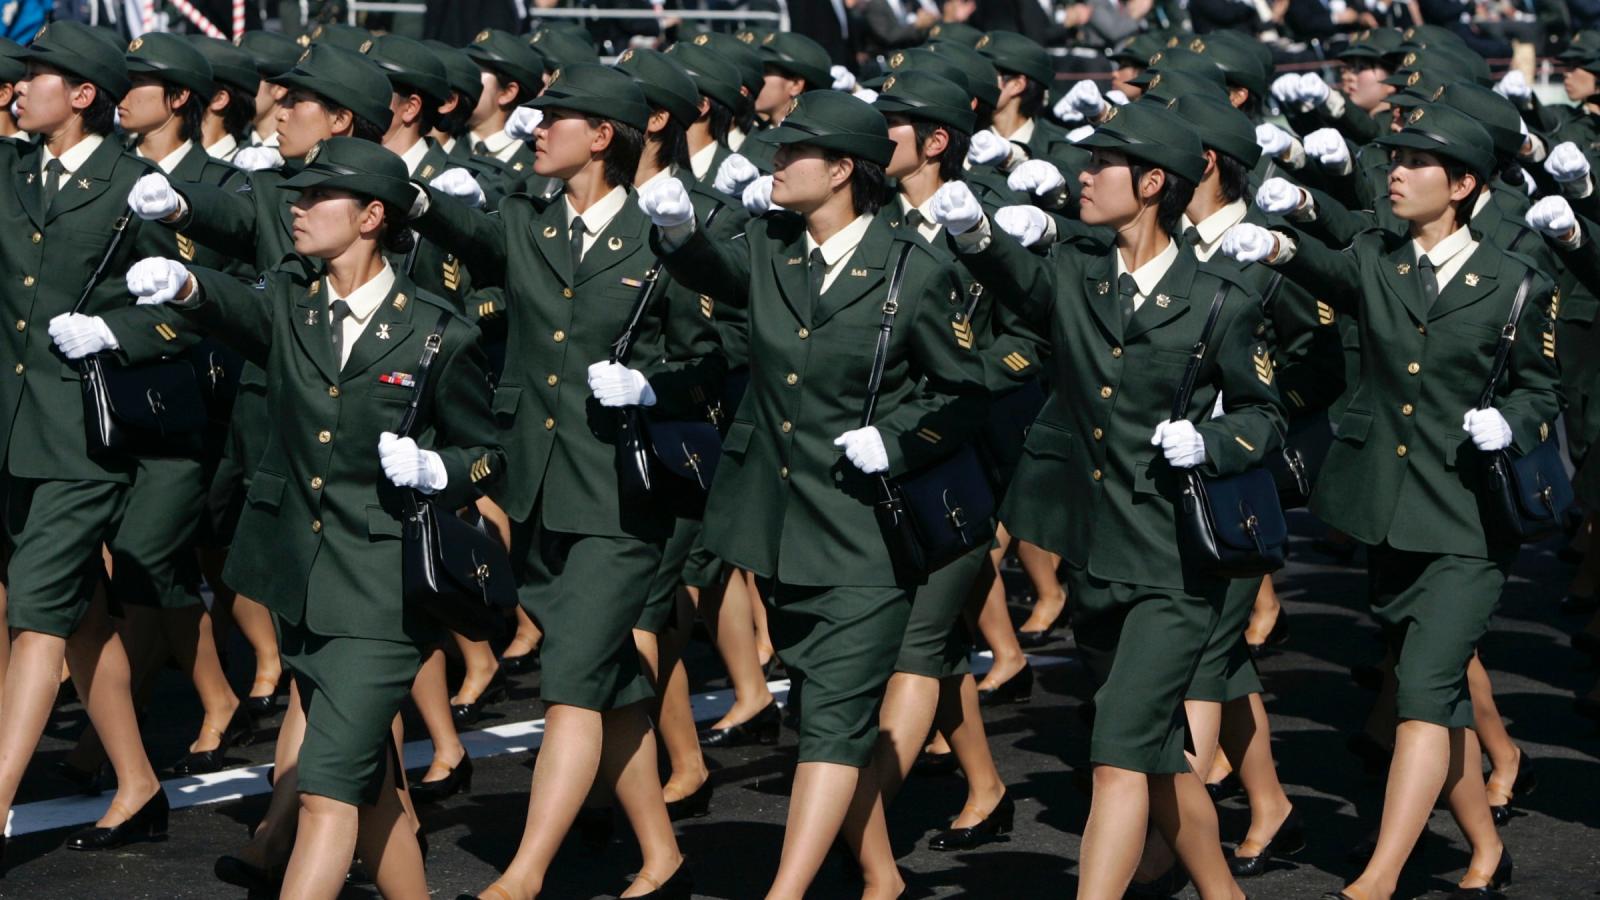 Japan's military is looking for a few good women